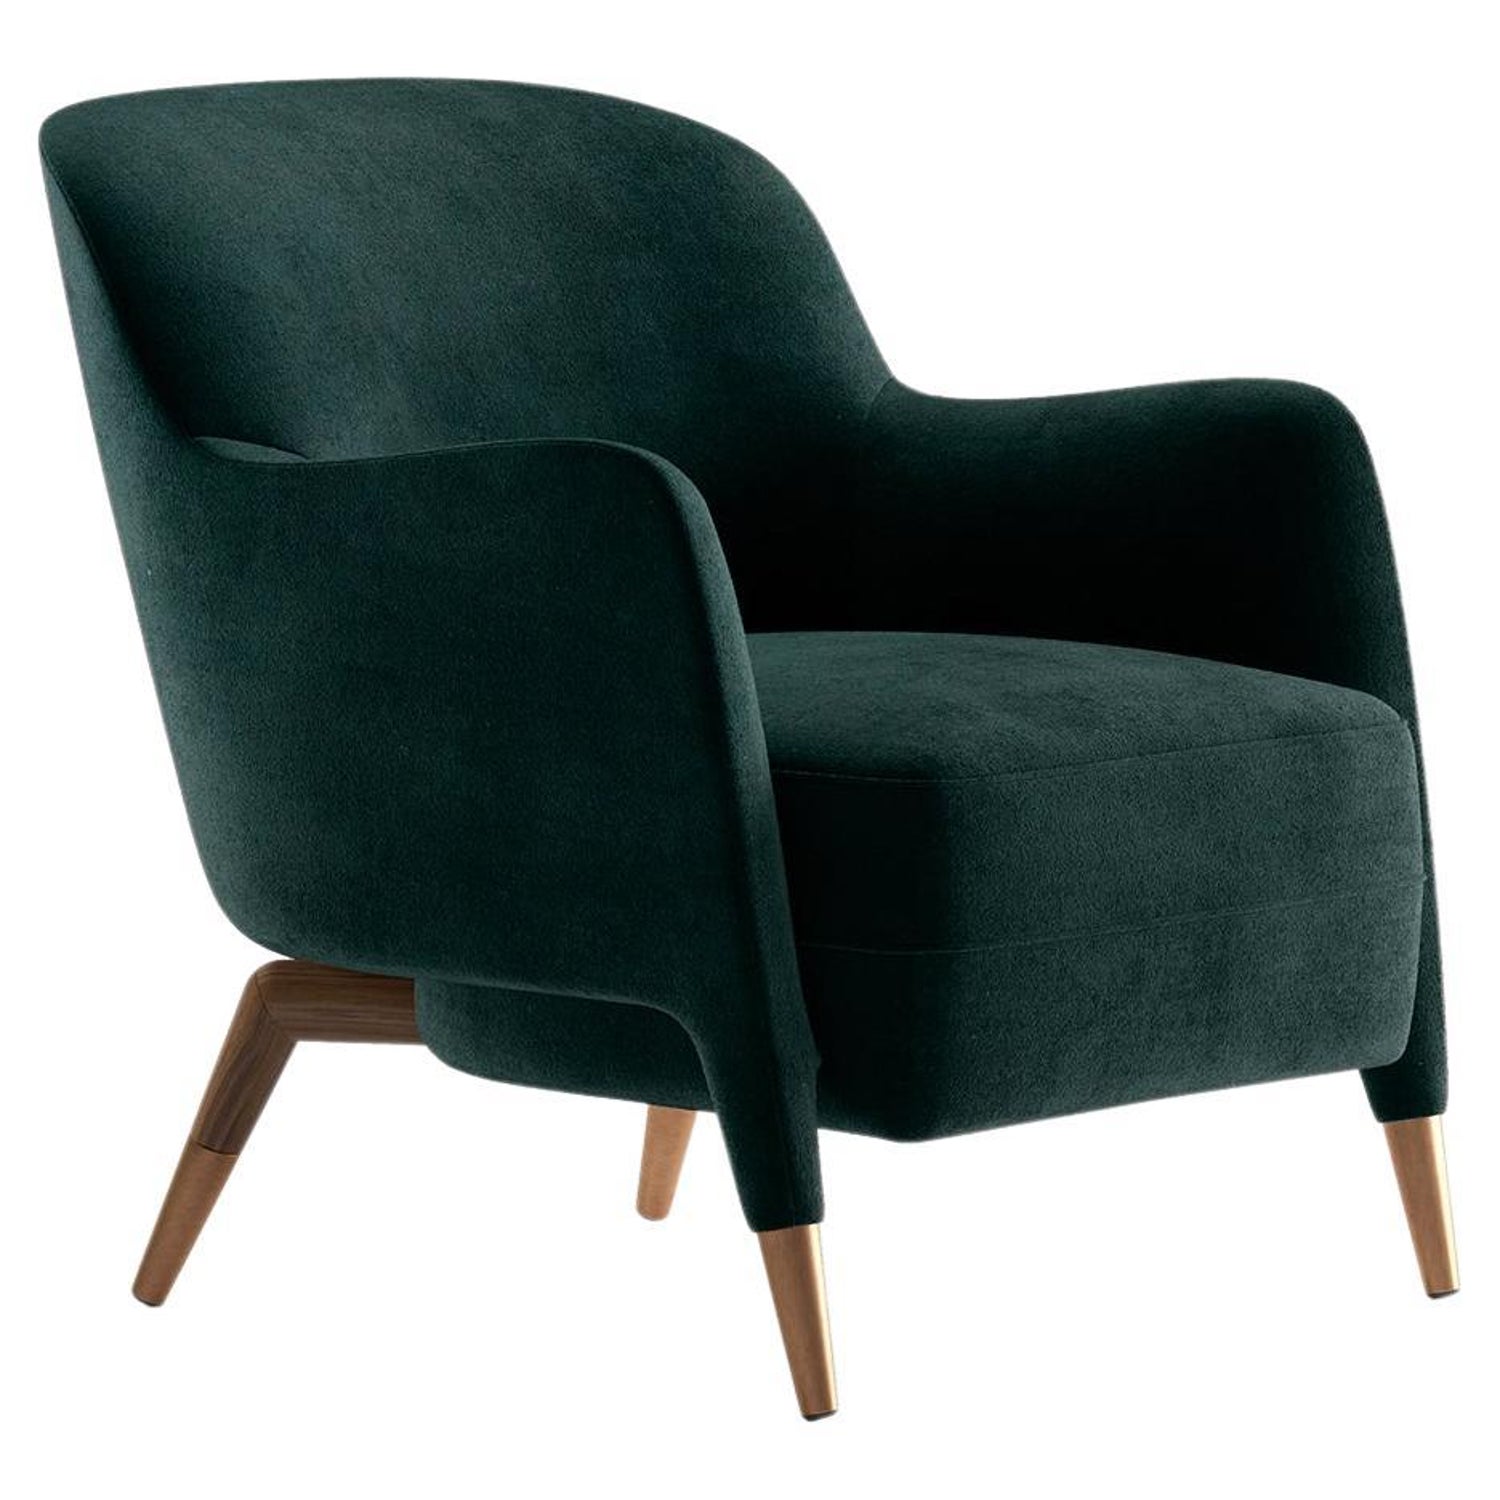 Armchair in Greywear Linen Molteni&C by Gio Ponti Design D.151.4, Made in  Italy For Sale at 1stDibs